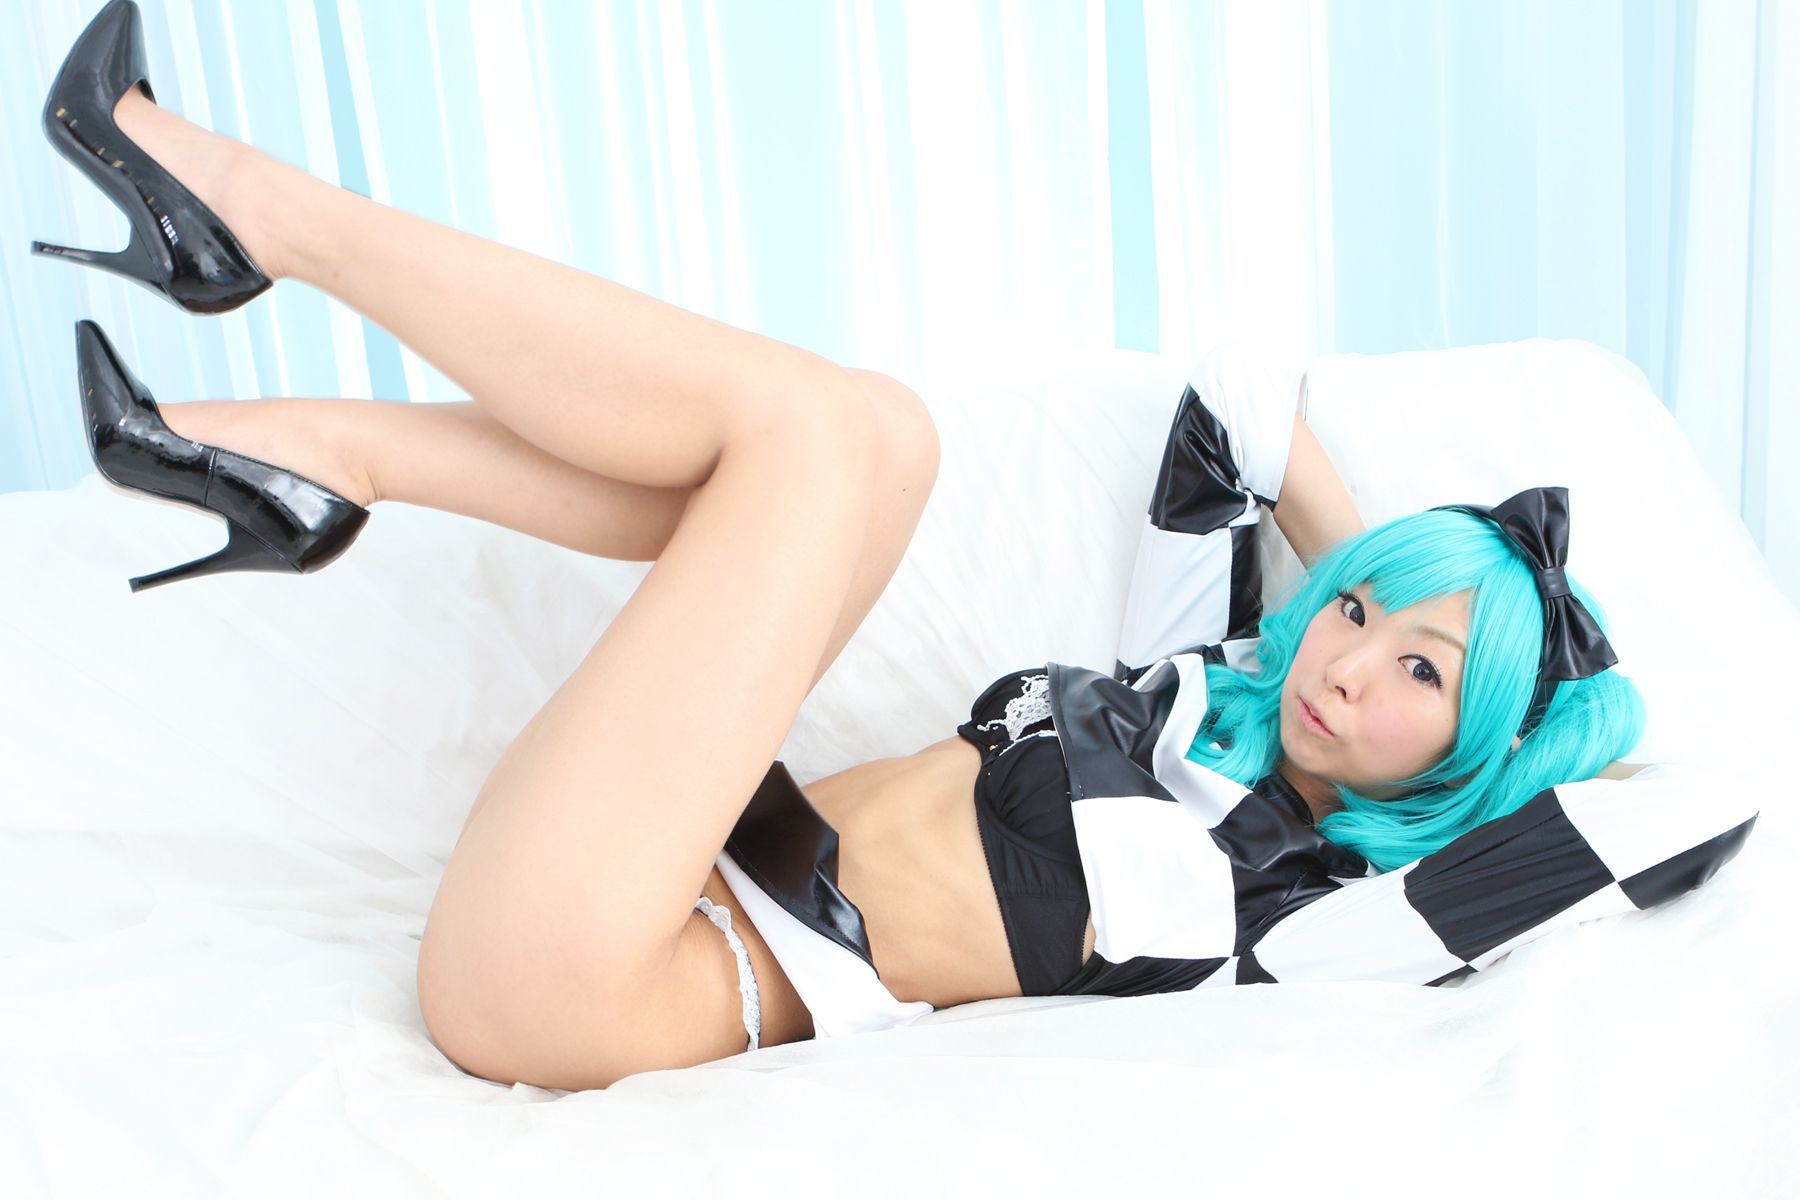 taotuhome[Cosplay套图] New Hatsune Miku from Vocaloid - So Sexy第29张